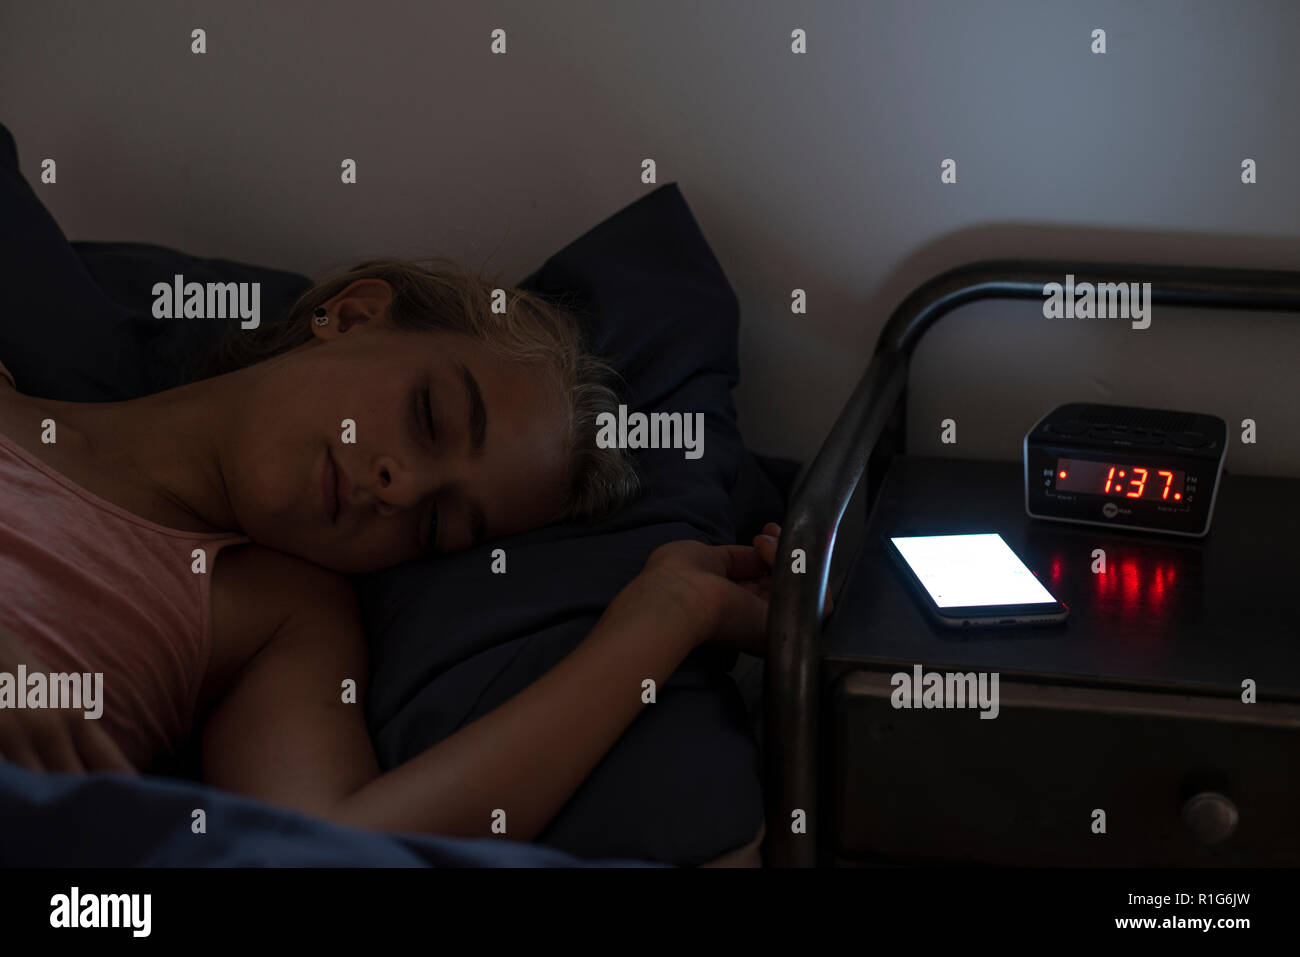 Young girl in bed late at night sleeping with her mobile phone on her night stand. Stock Photo